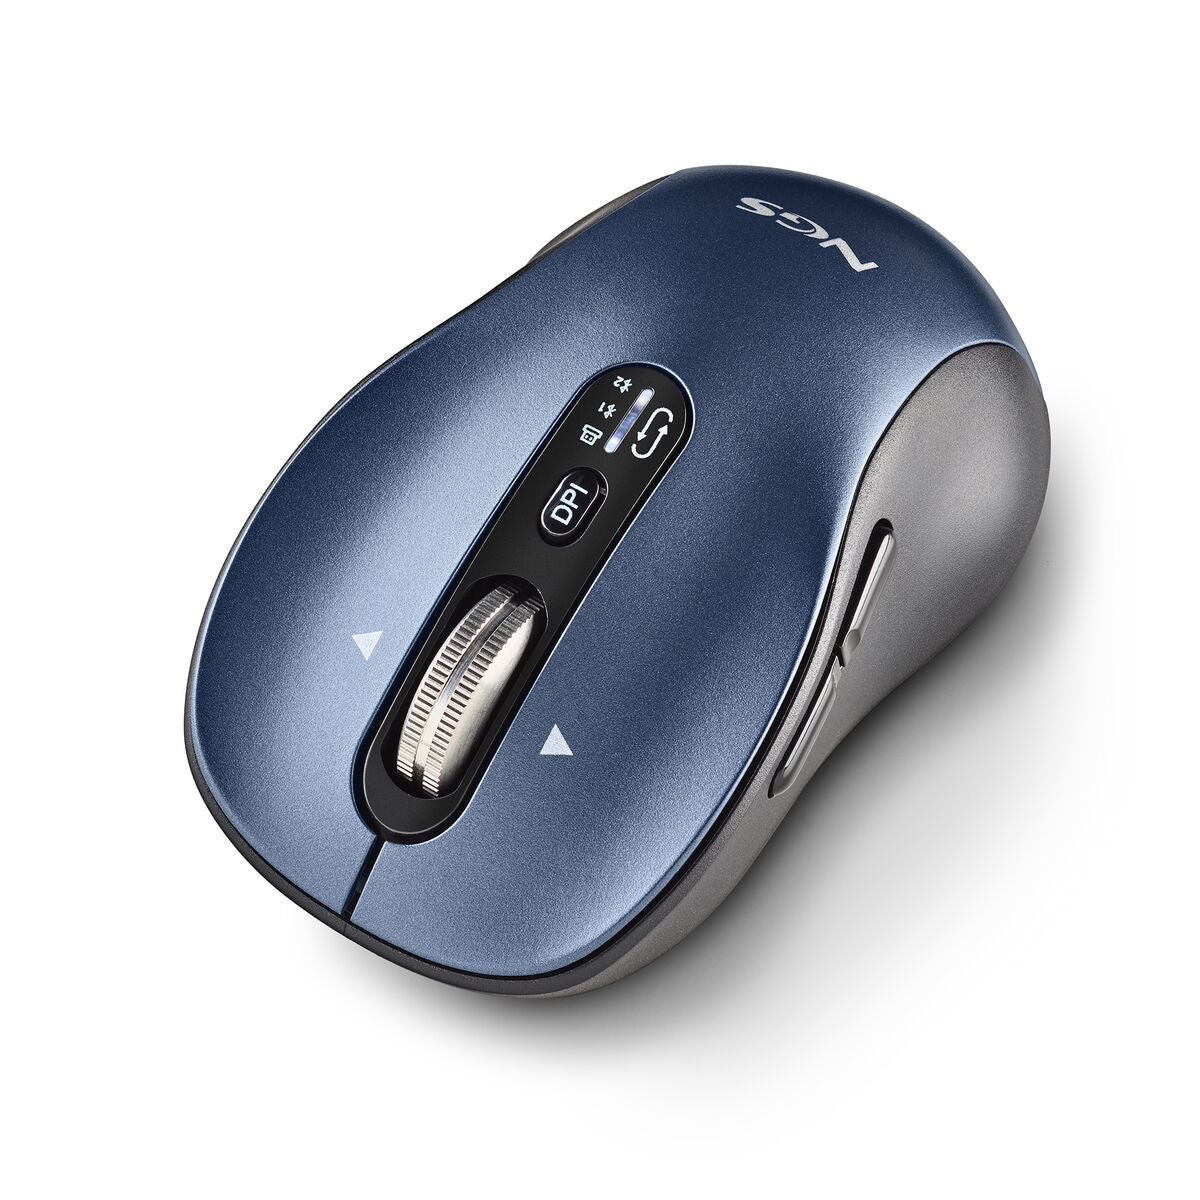 Mouse NGS INFINITY-RB Black/Blue 3200 DPI